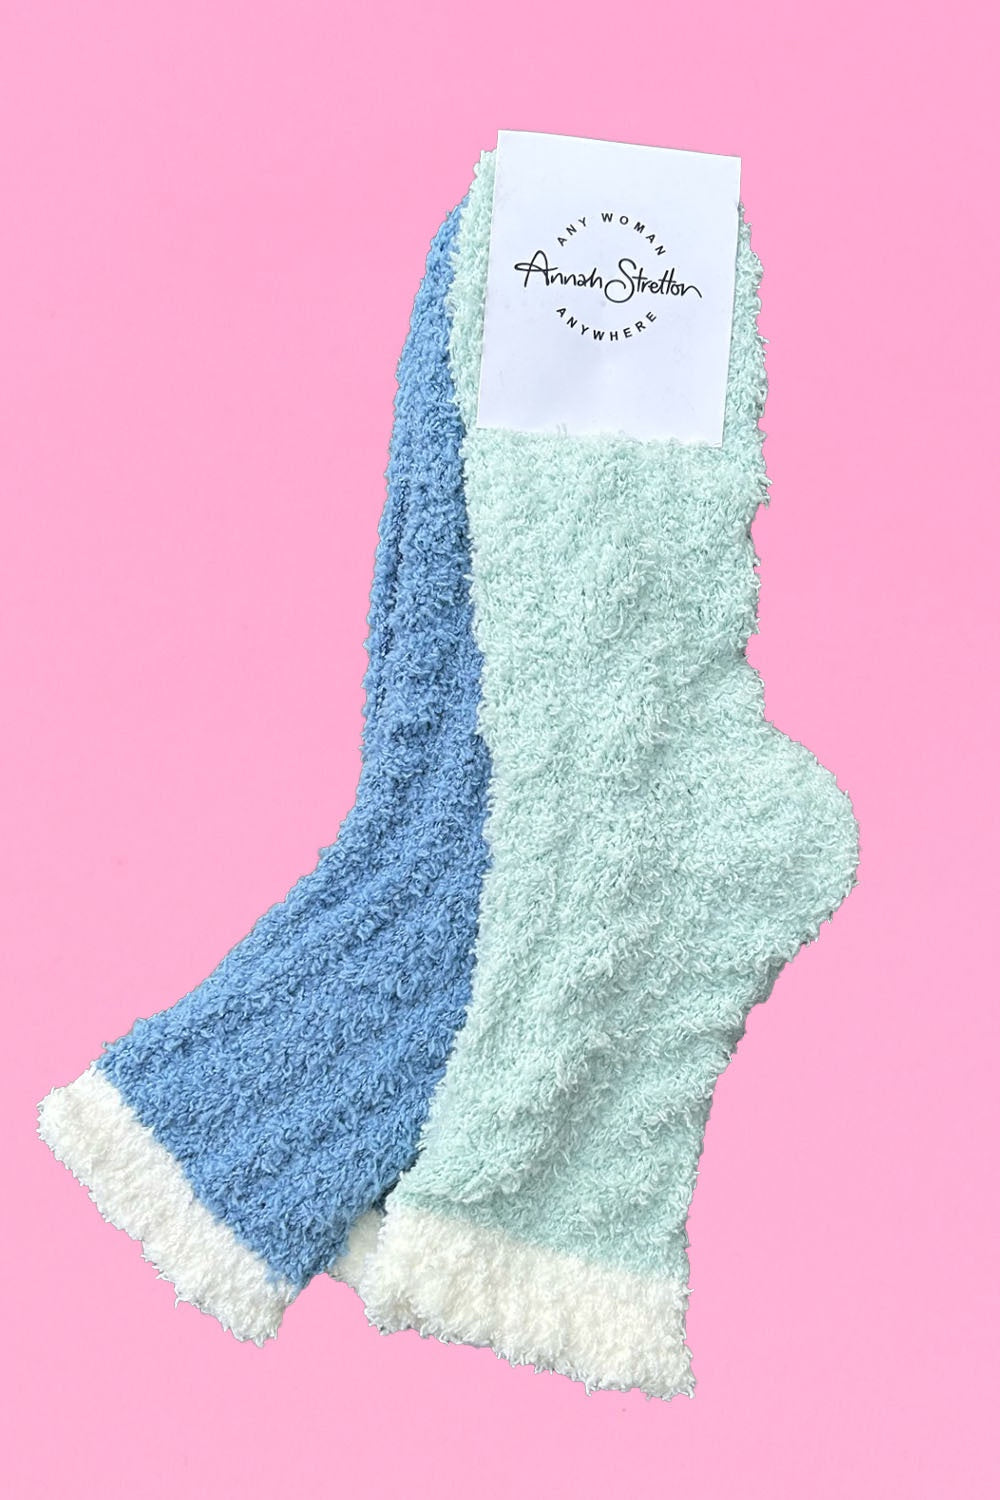 The pack of 2 Annah Stretton Bed Socks in blues